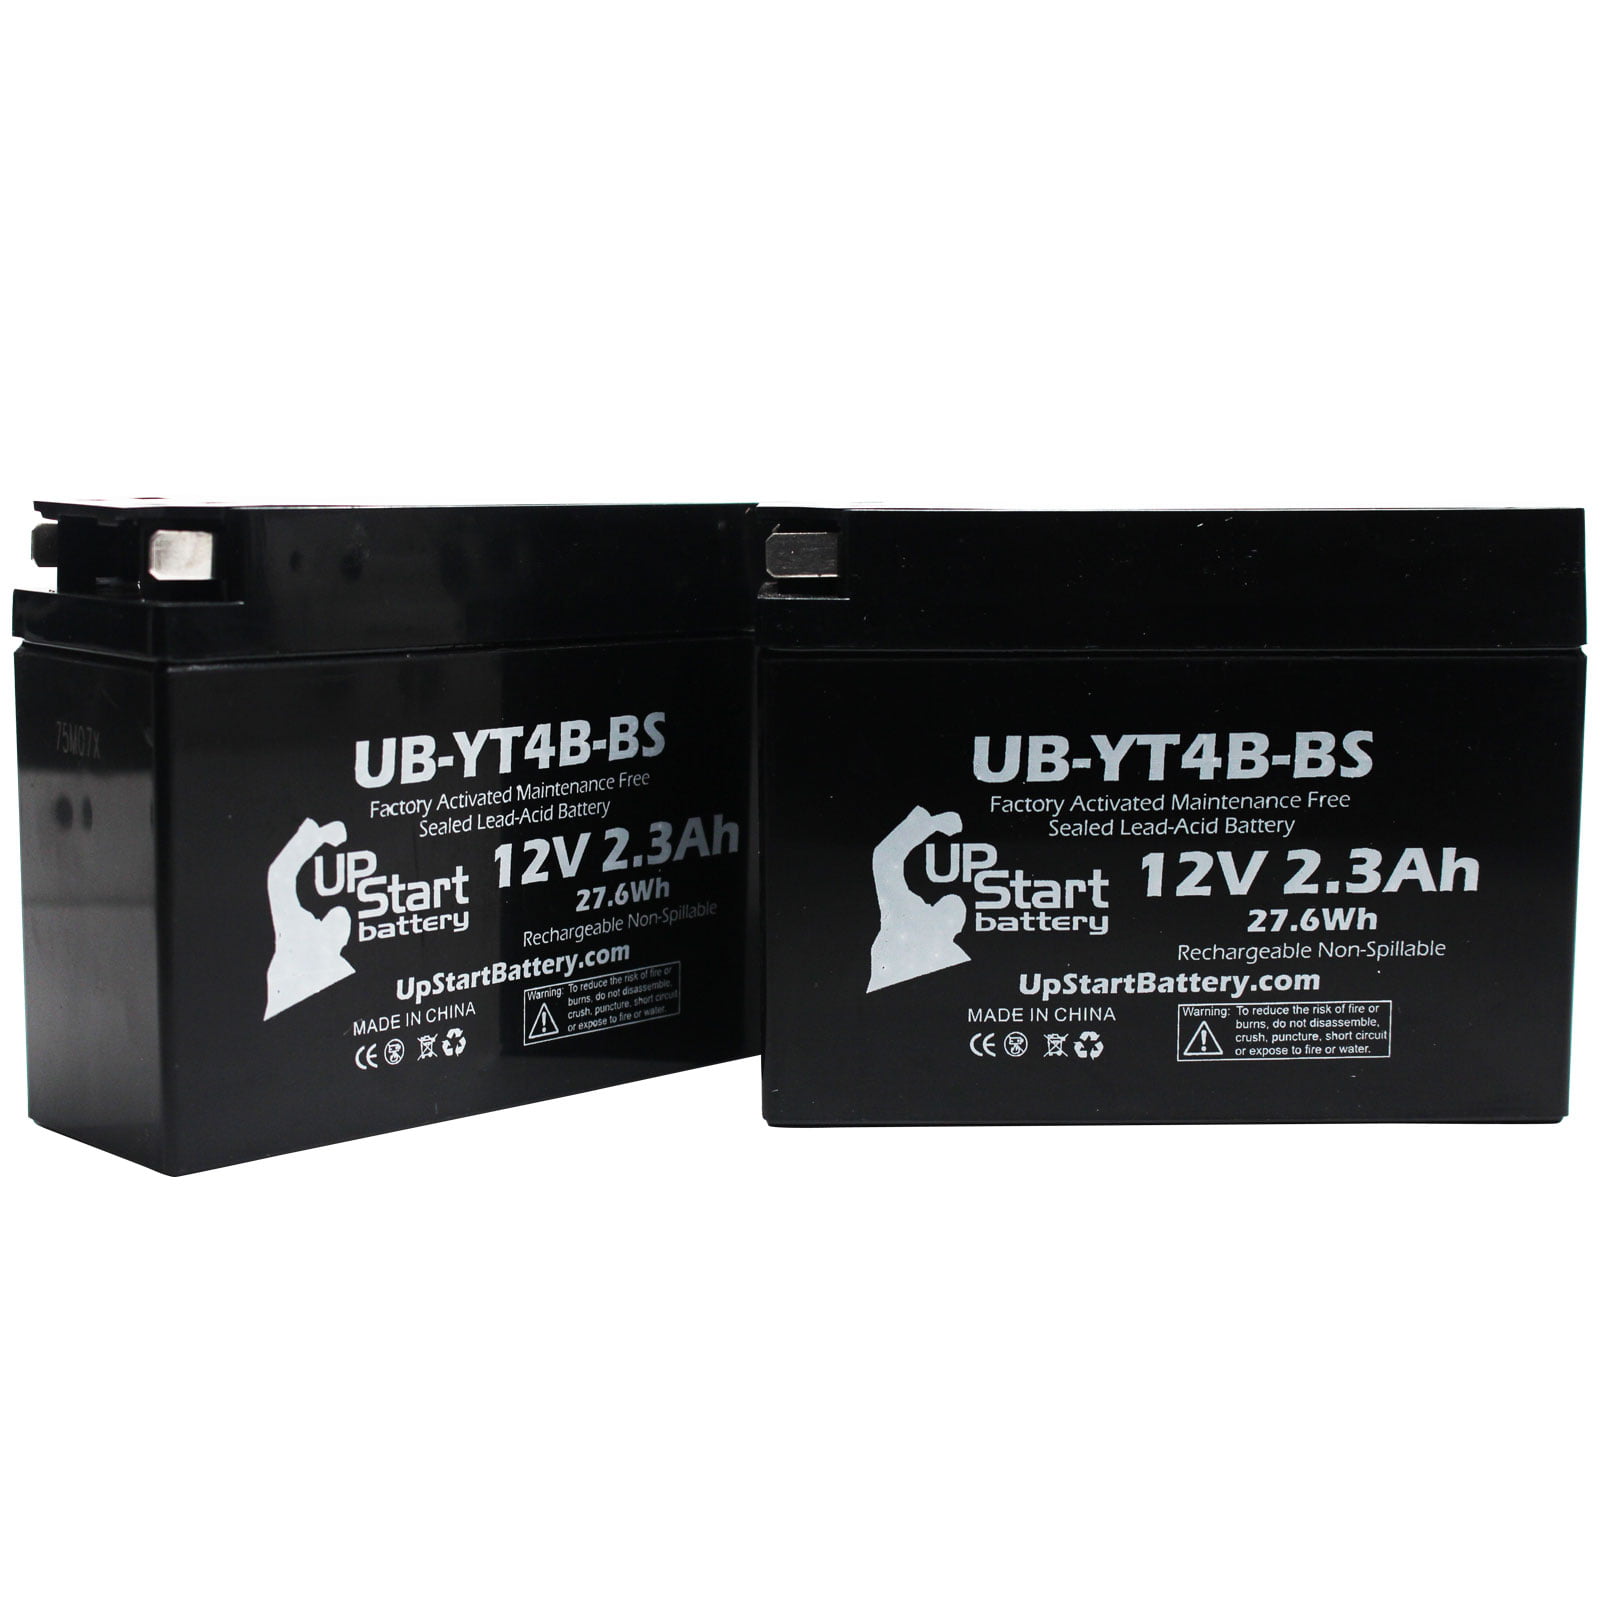 Replacement for 2006 Yamaha TTR50E 50CC Factory Activated 2.3Ah UB-YT4B-BS Motorcycle Battery 12V Maintenance Free